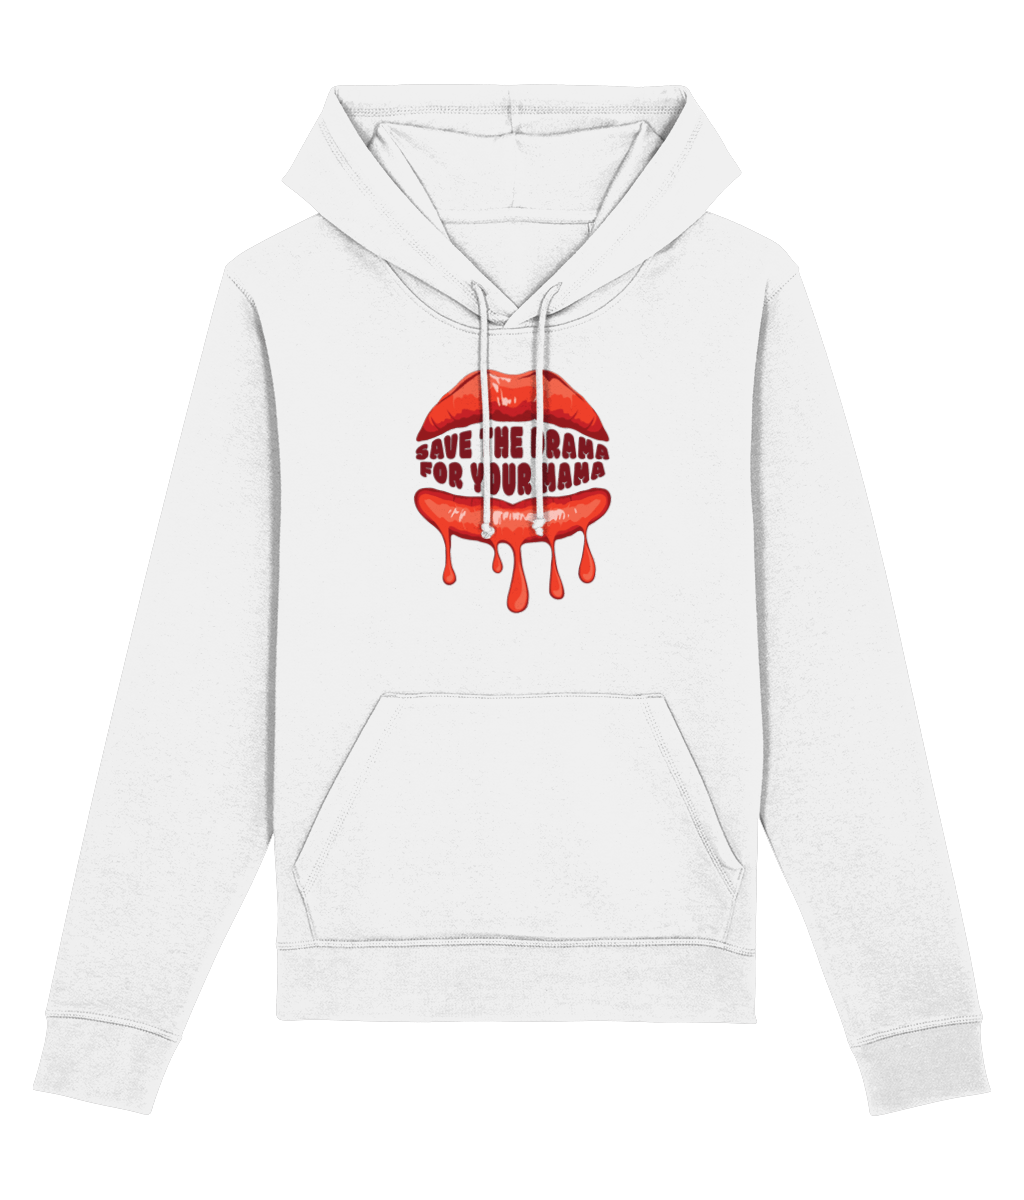 Contemporary 'Save The Drama' Organic Cotton Hoodie - Hoodie Gift